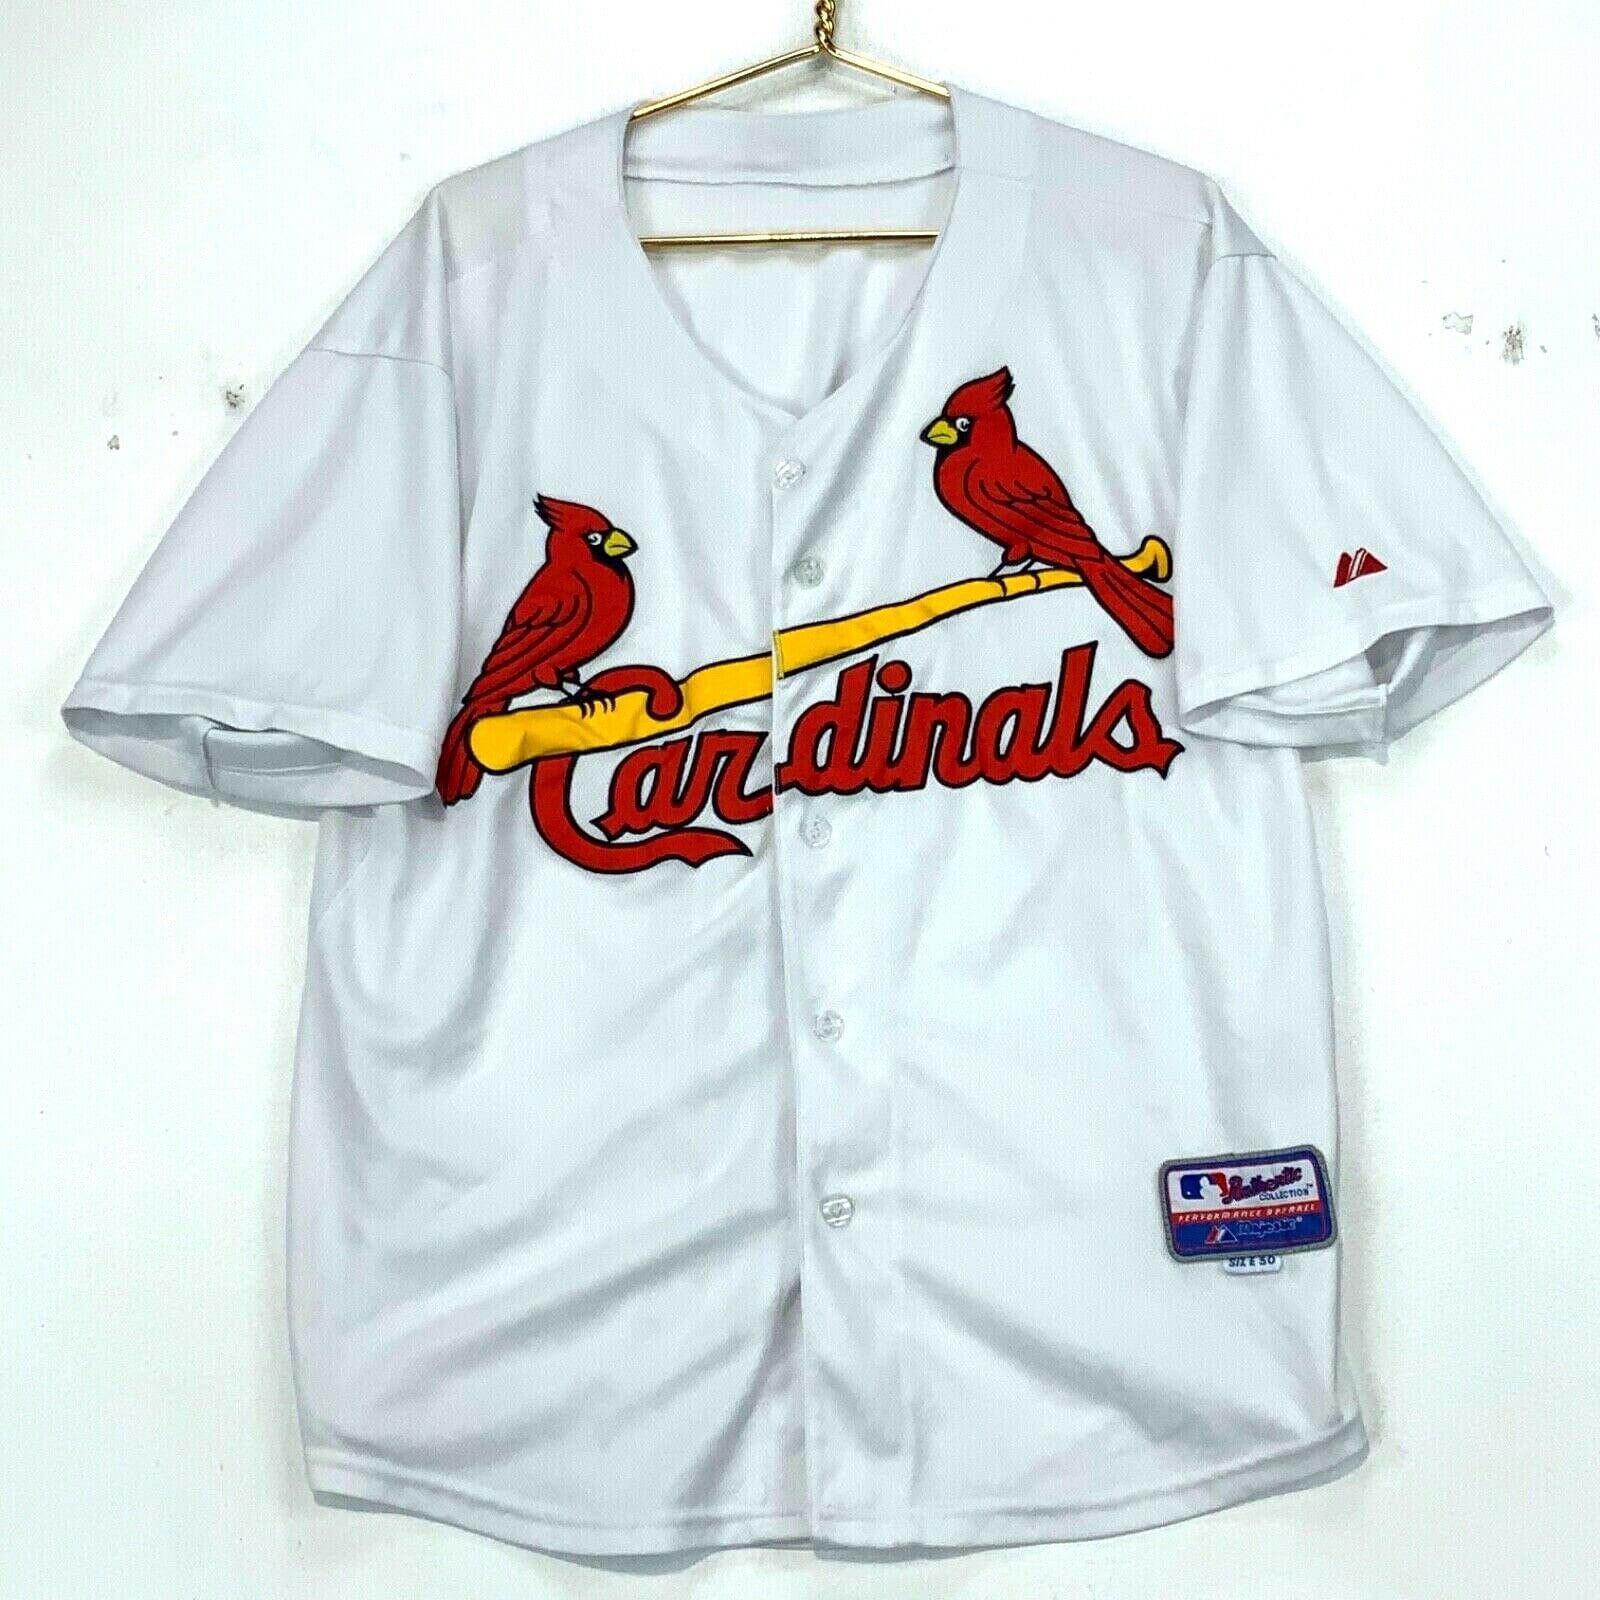 St. Louis Cardinals Boys Performance T-Shirt by Majestic